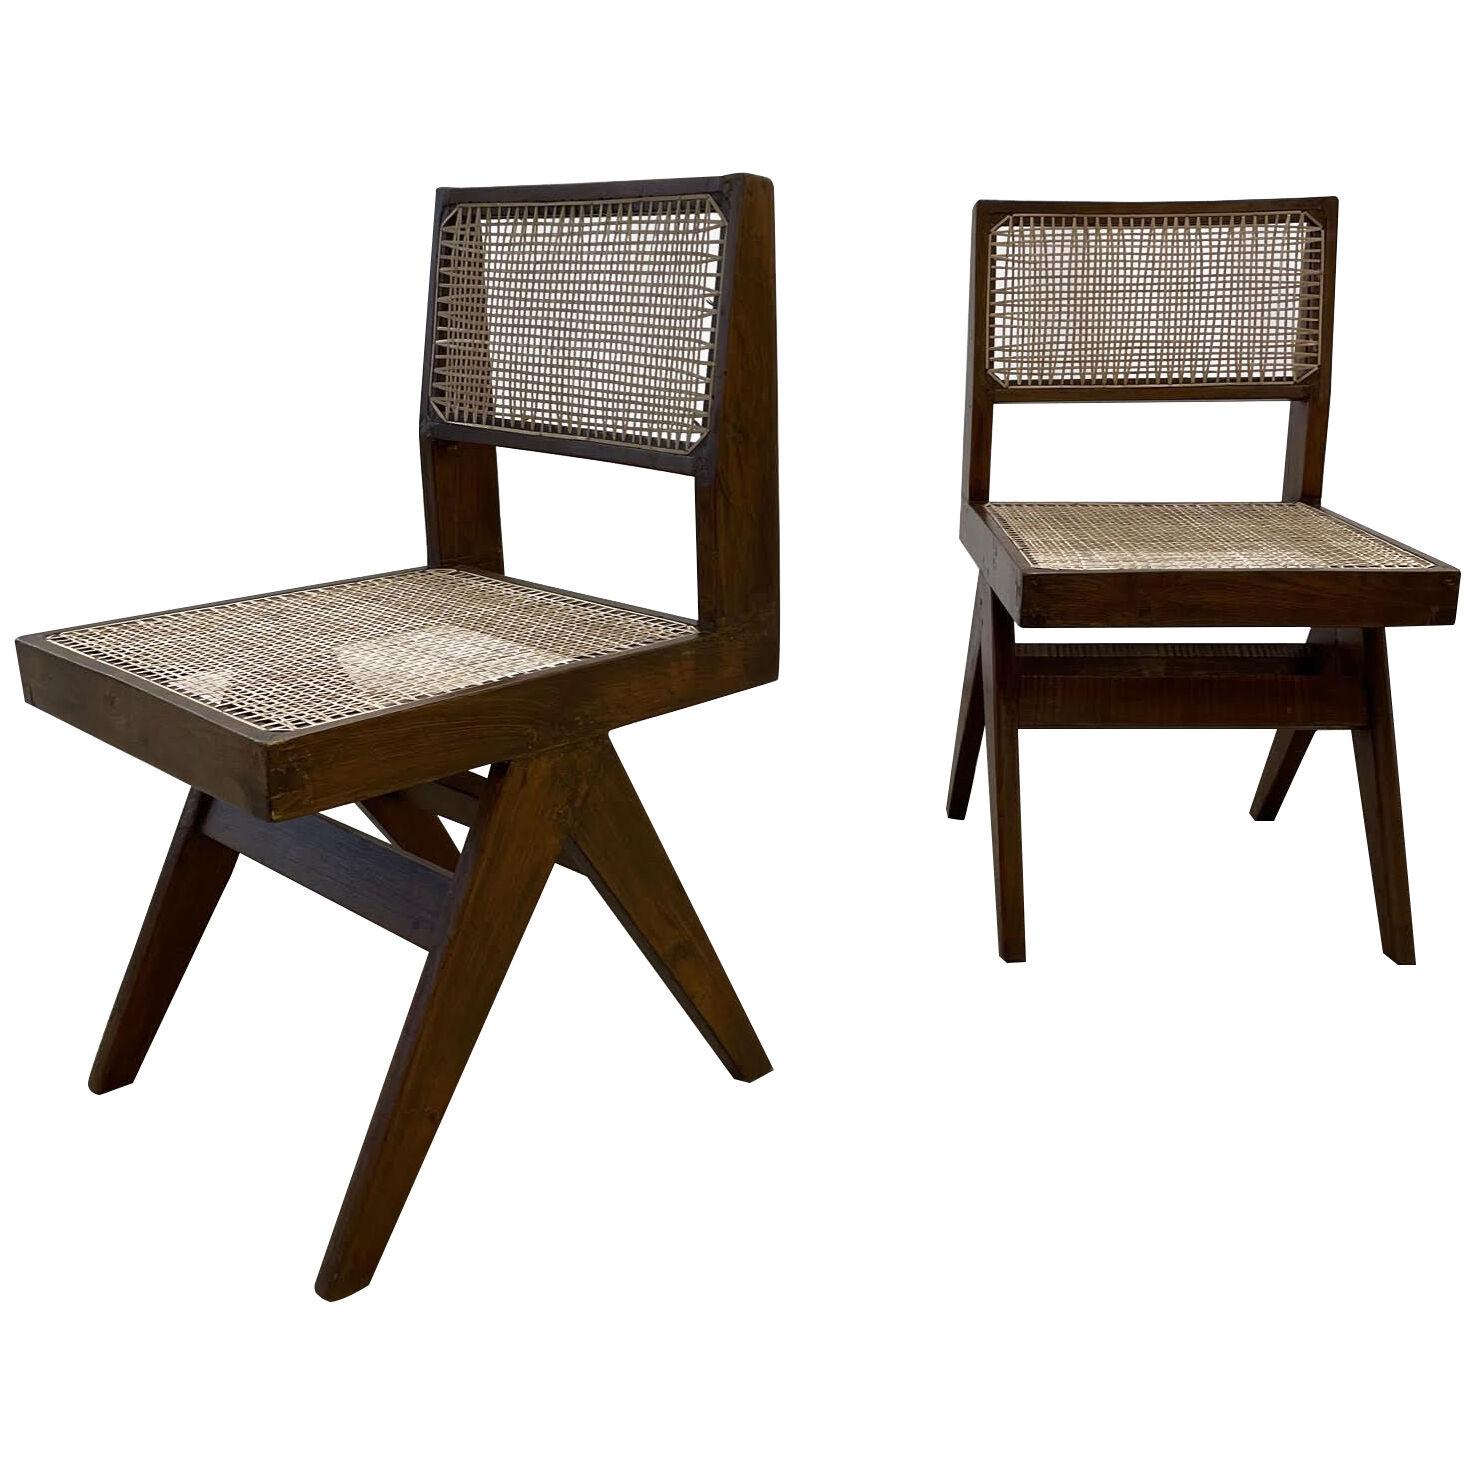 Pair of Mid-Century Modern Pierre Jeanneret Armless Dining Chairs, Teak, Cane	